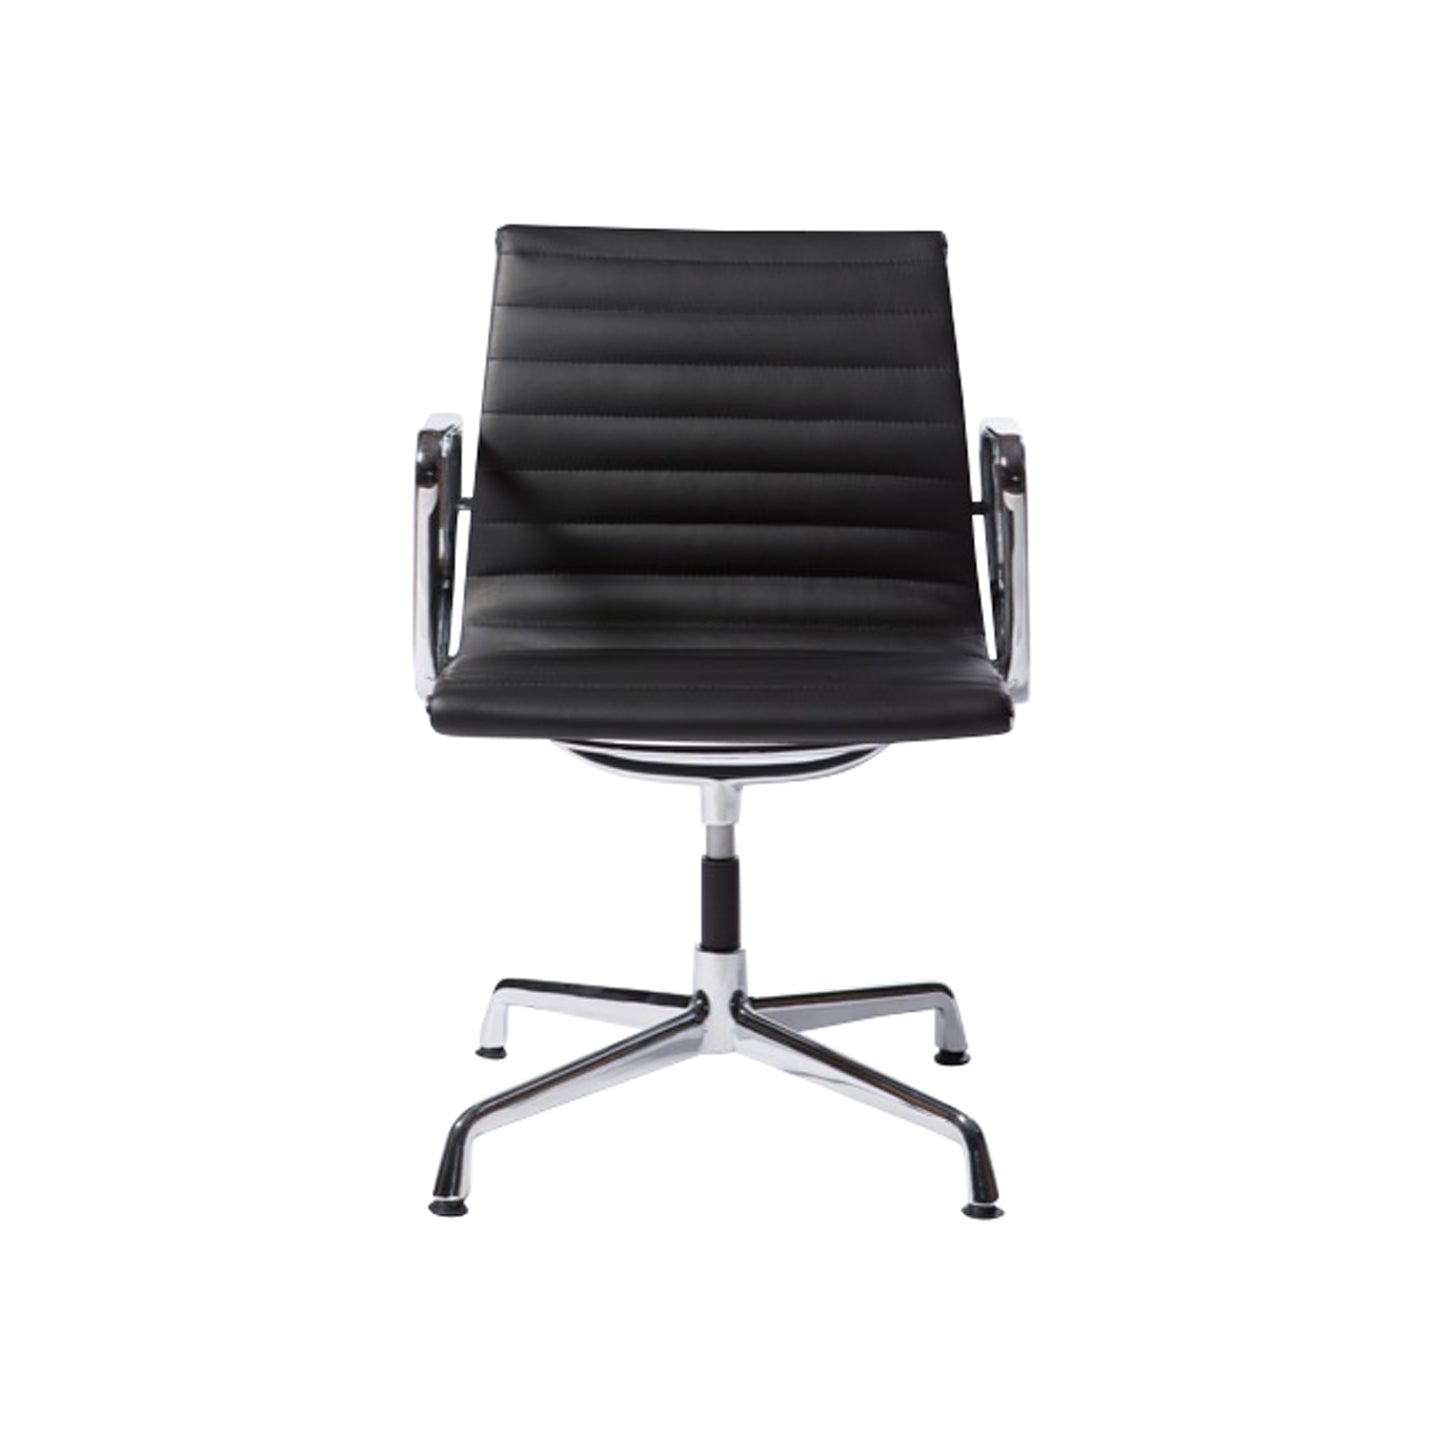 Chair without wheels aluminium style | Black Leather | Front